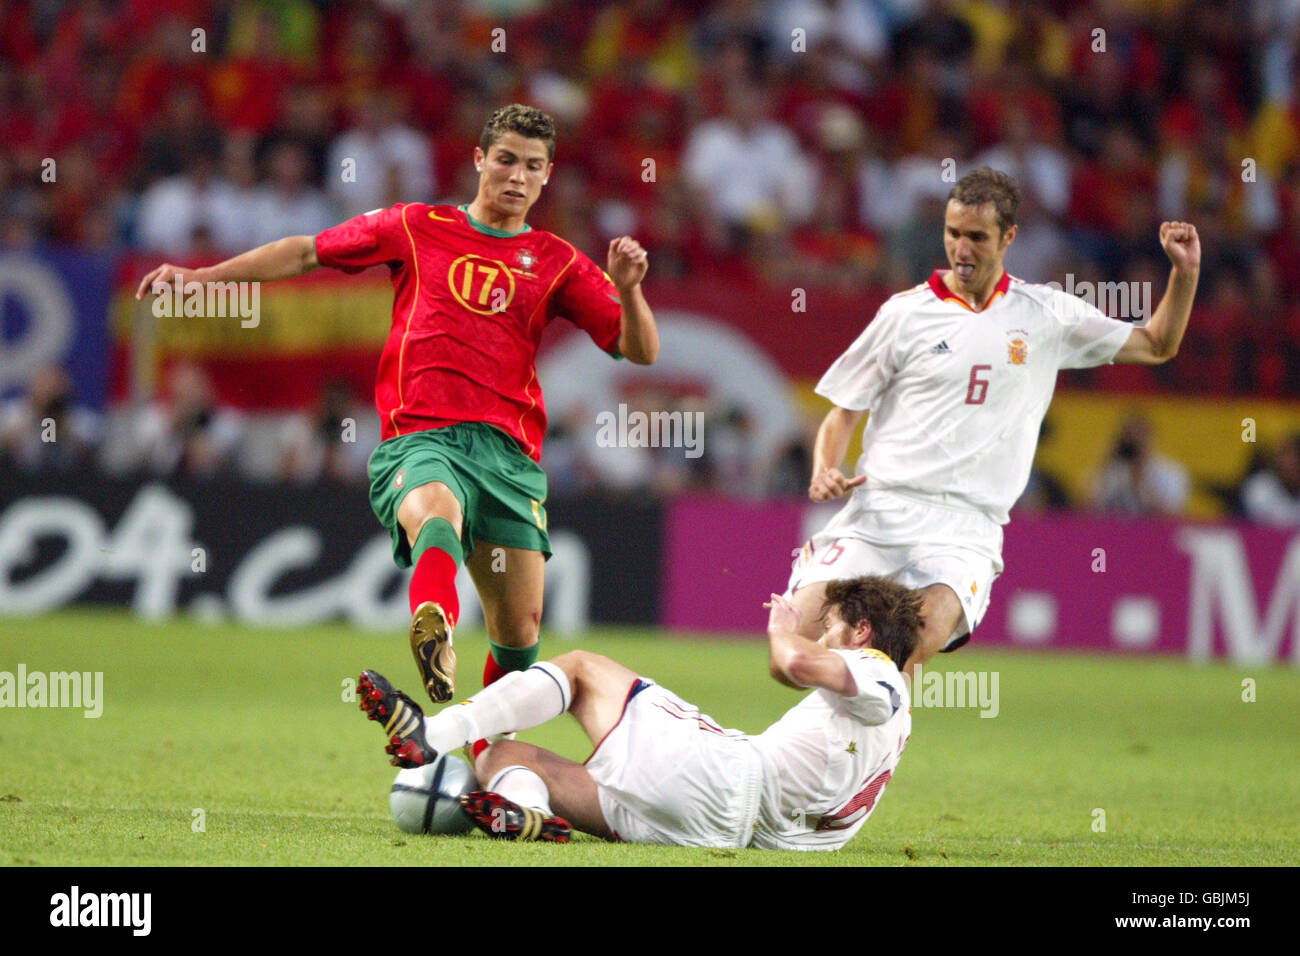 Spain's Xabi Alonso (c) slides in to tackle Portugal's Cristiano Ronaldo (l) as teammate Ivan Helguera (r) looks on Stock Photo